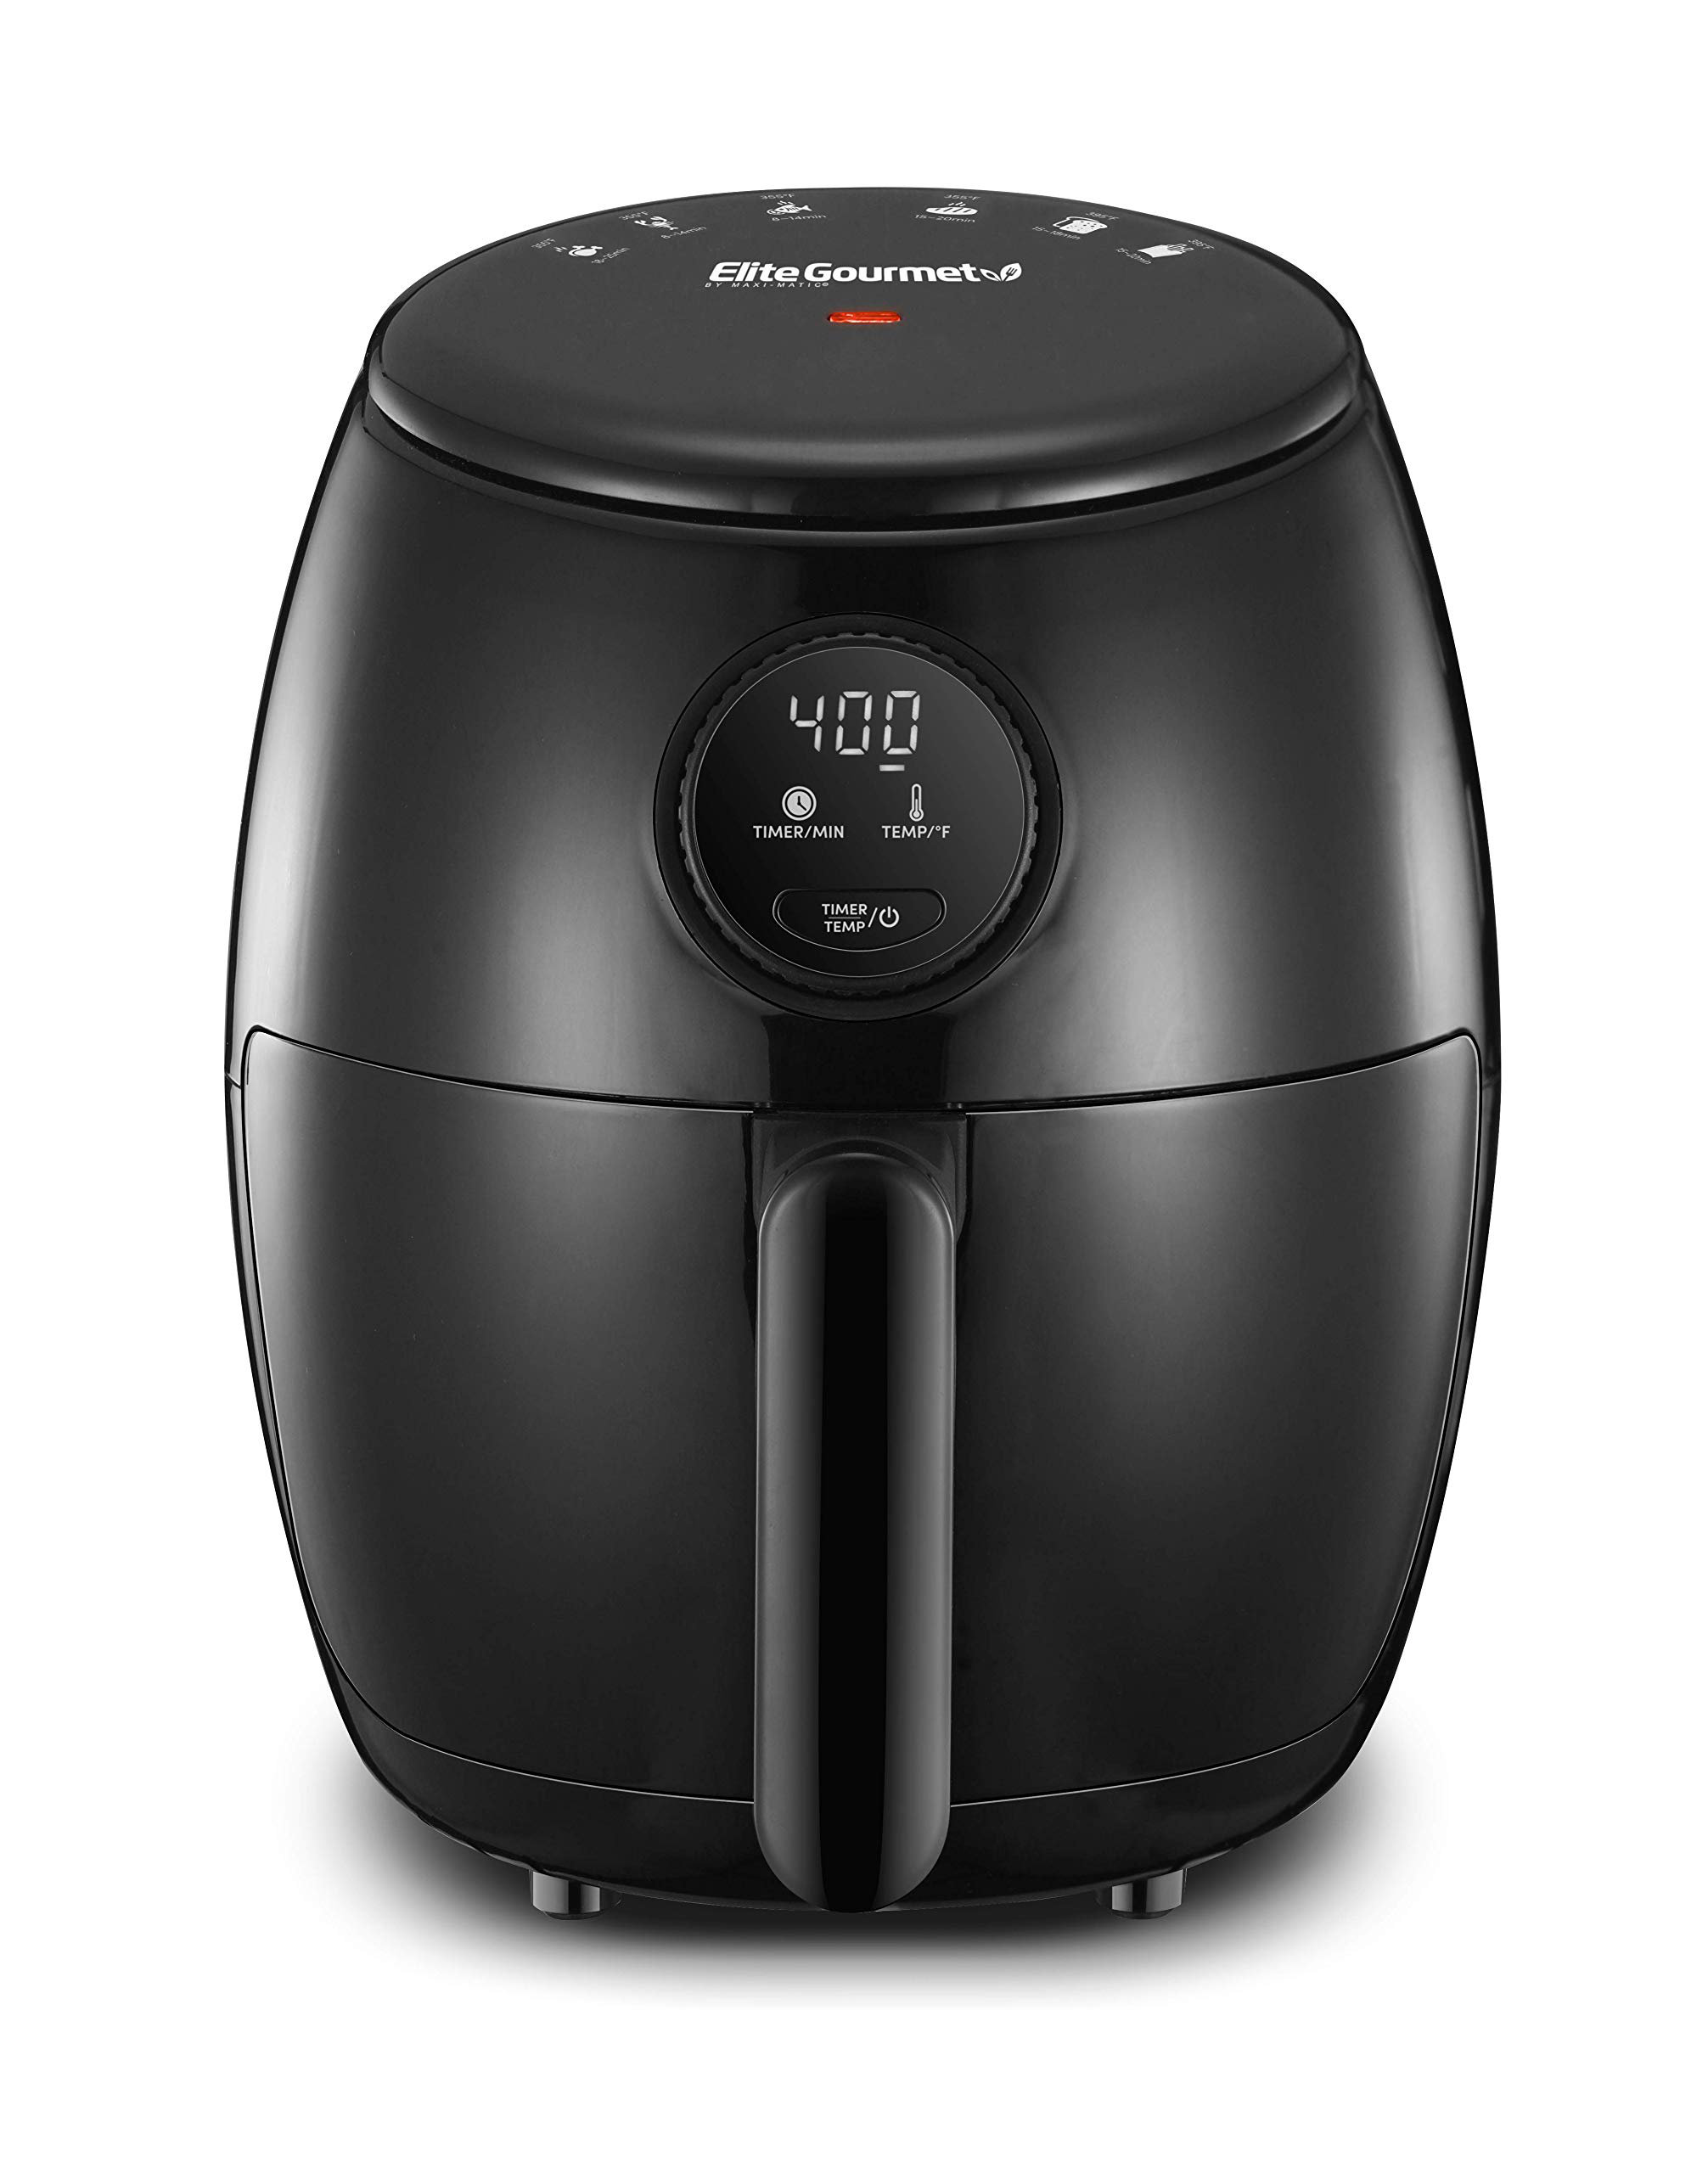 Electric Air Fryer & Oilless Cooker – Global